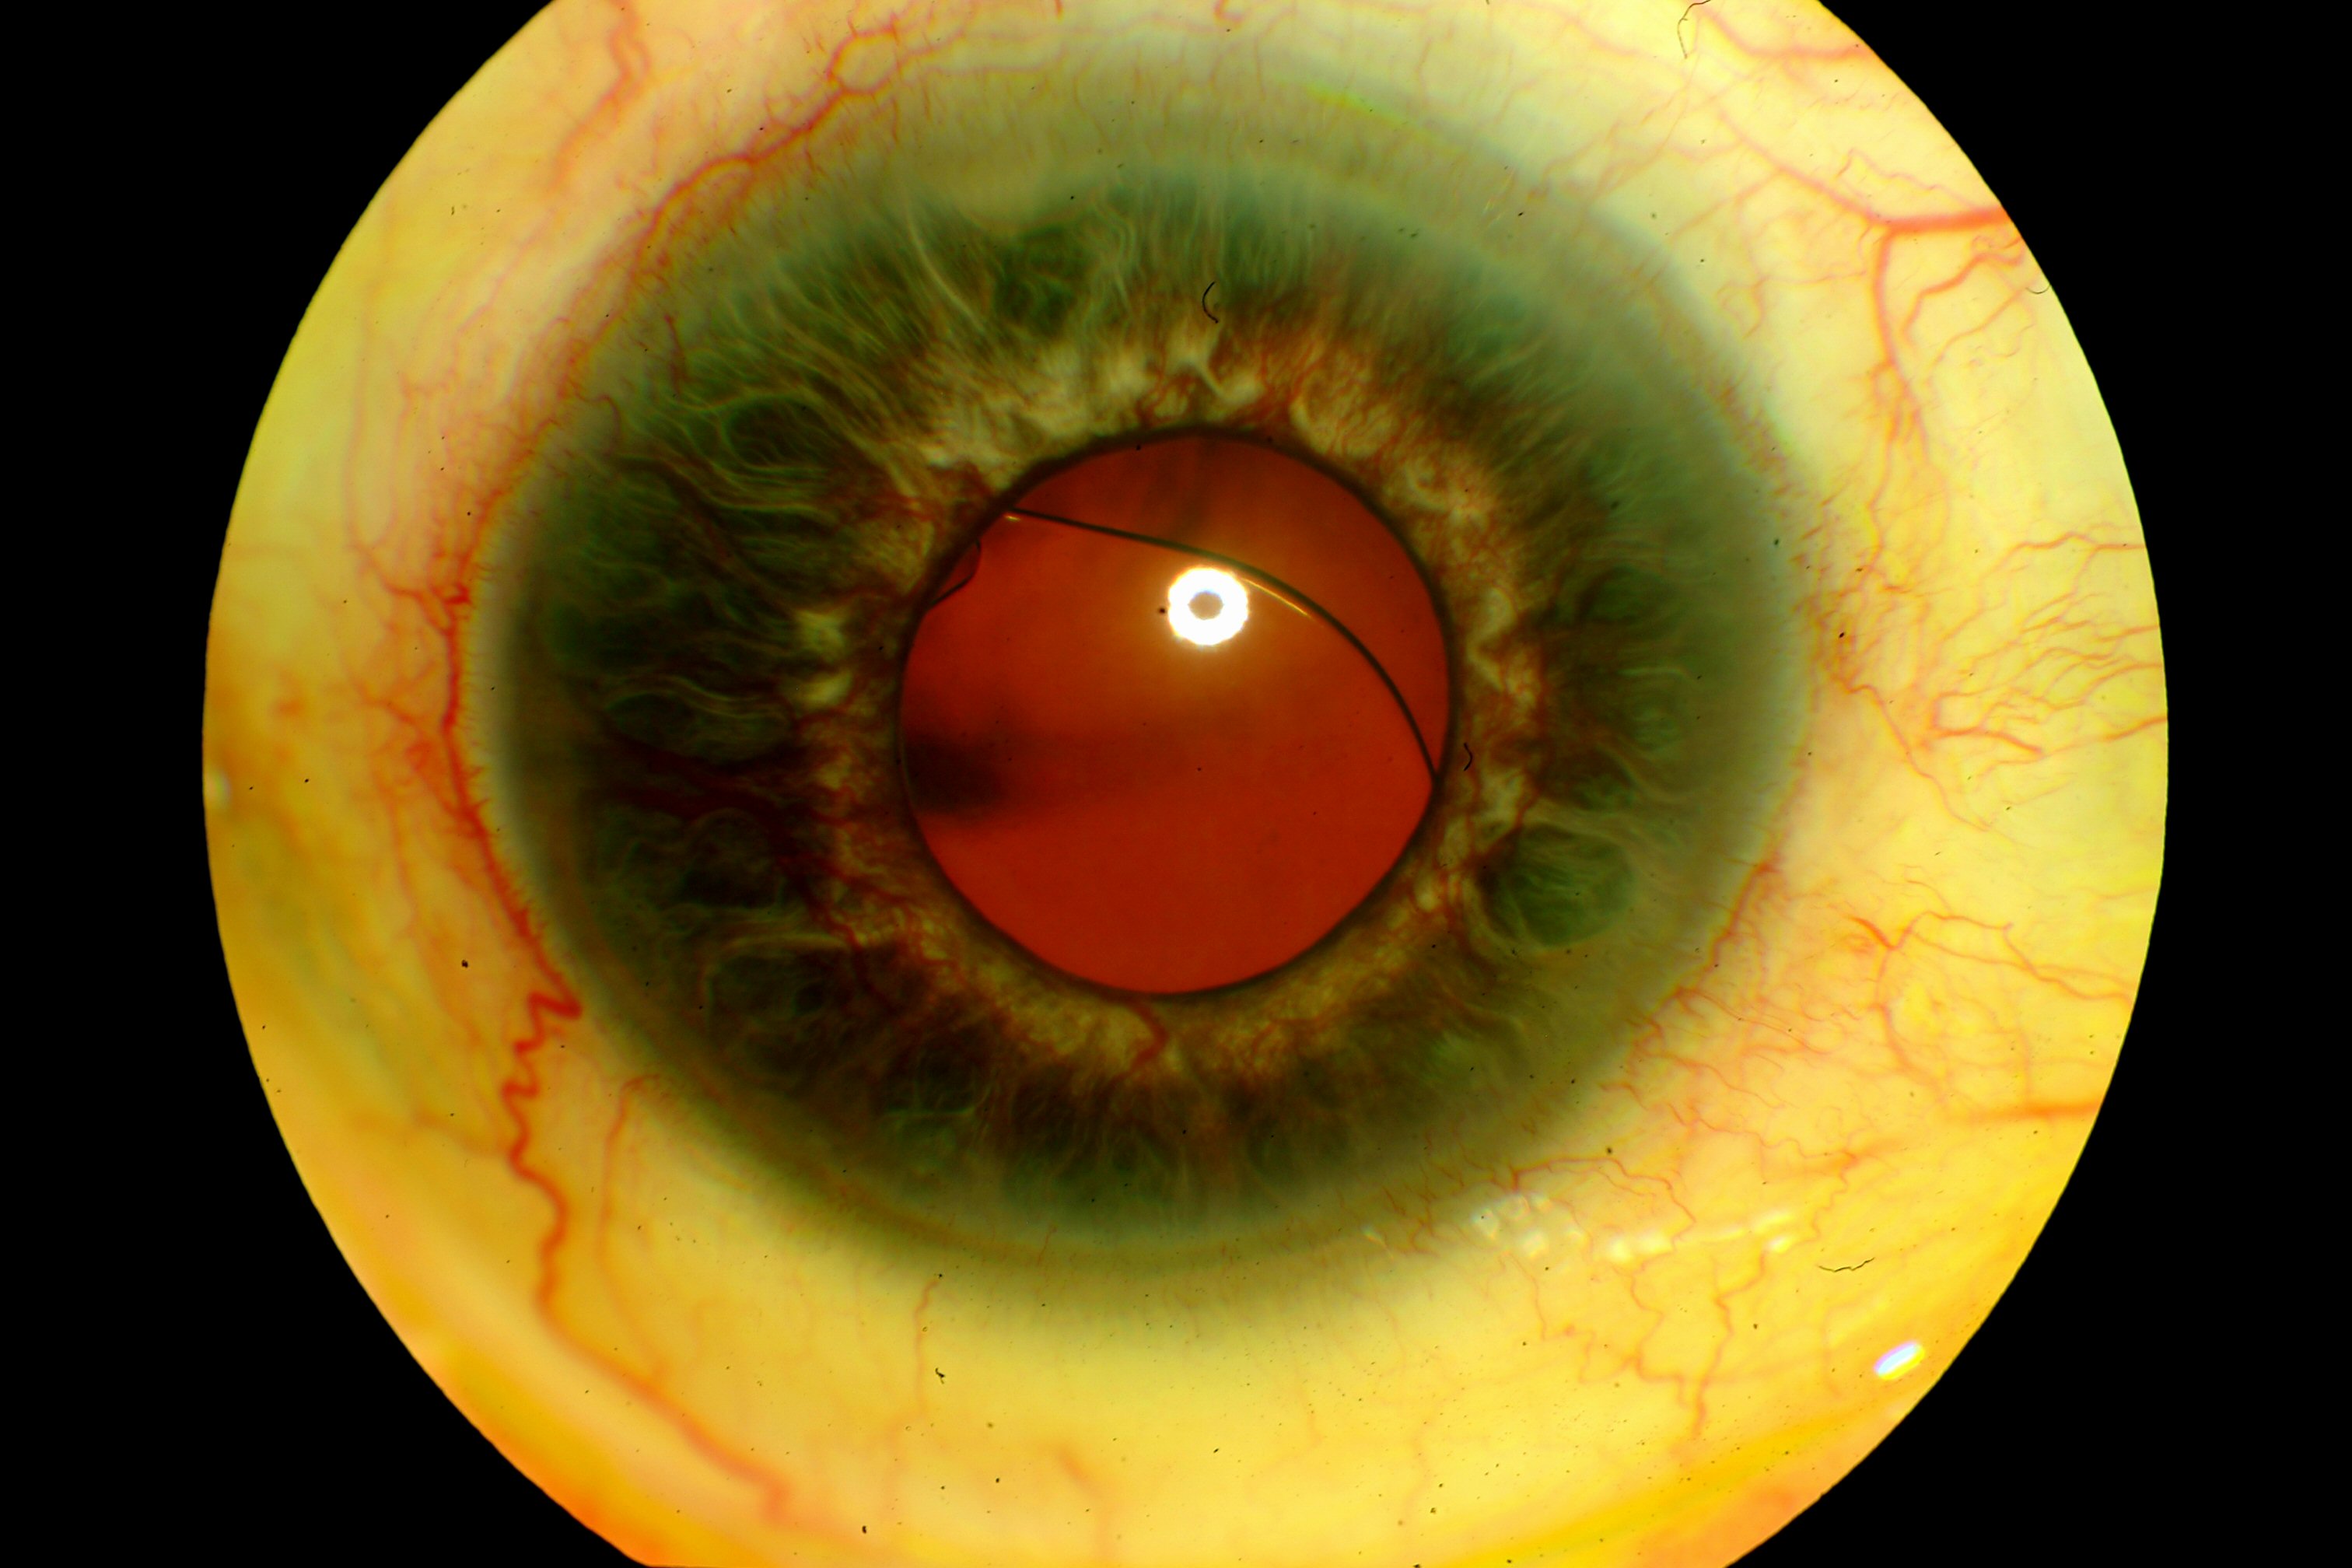 April 2013 - Iris Neovascularization secondary to Central Retinal